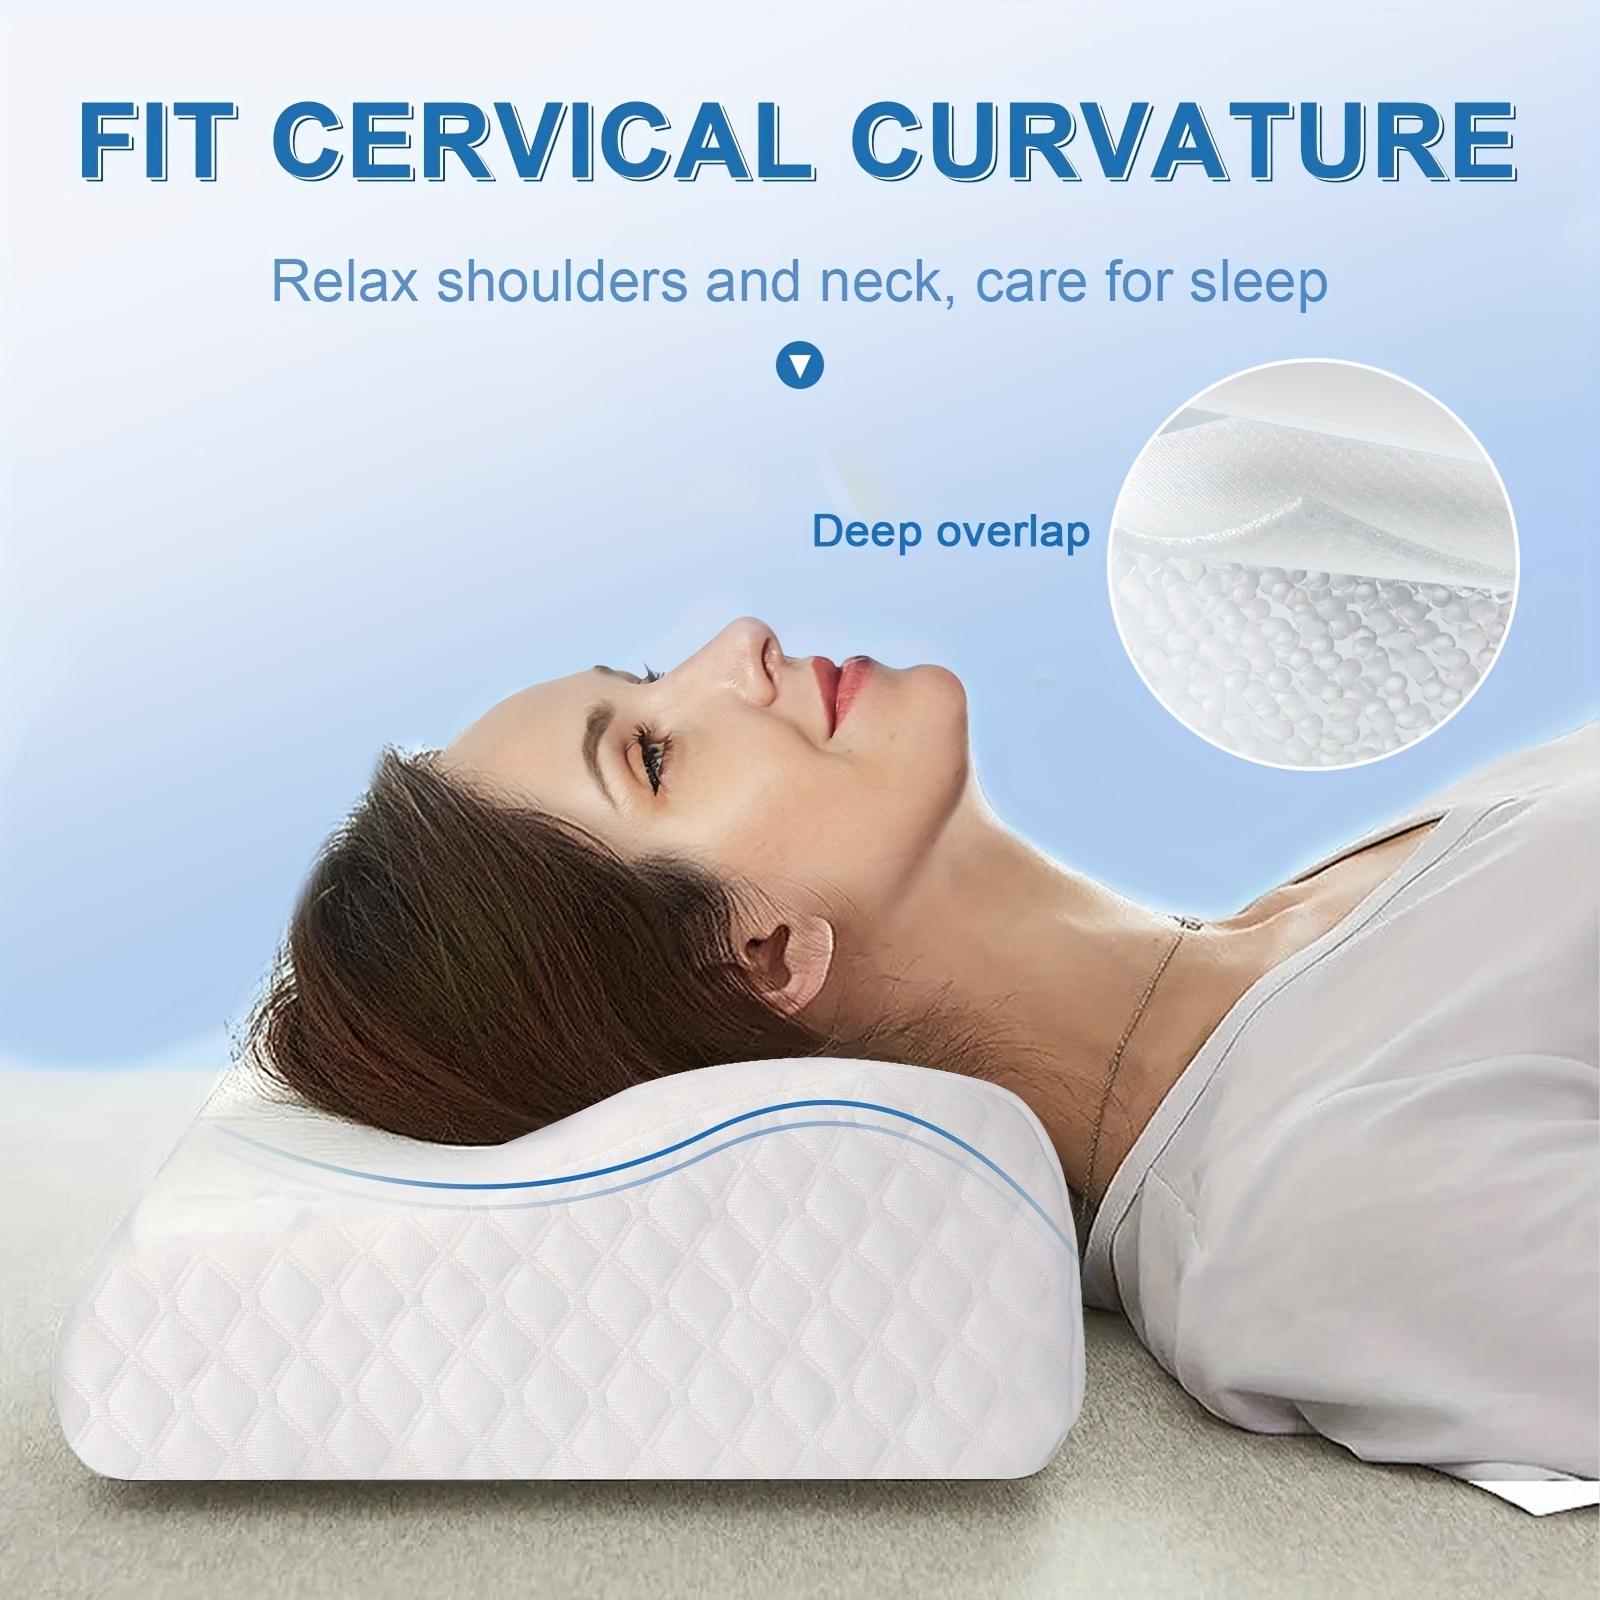 Memory Foam Pillows, Bed Pillow for Sleeping, Ergonomic Cervical Pillow  Neck Support Pillow for Side Back Stomach Sleeper, Orthopedic Contour  Pillow